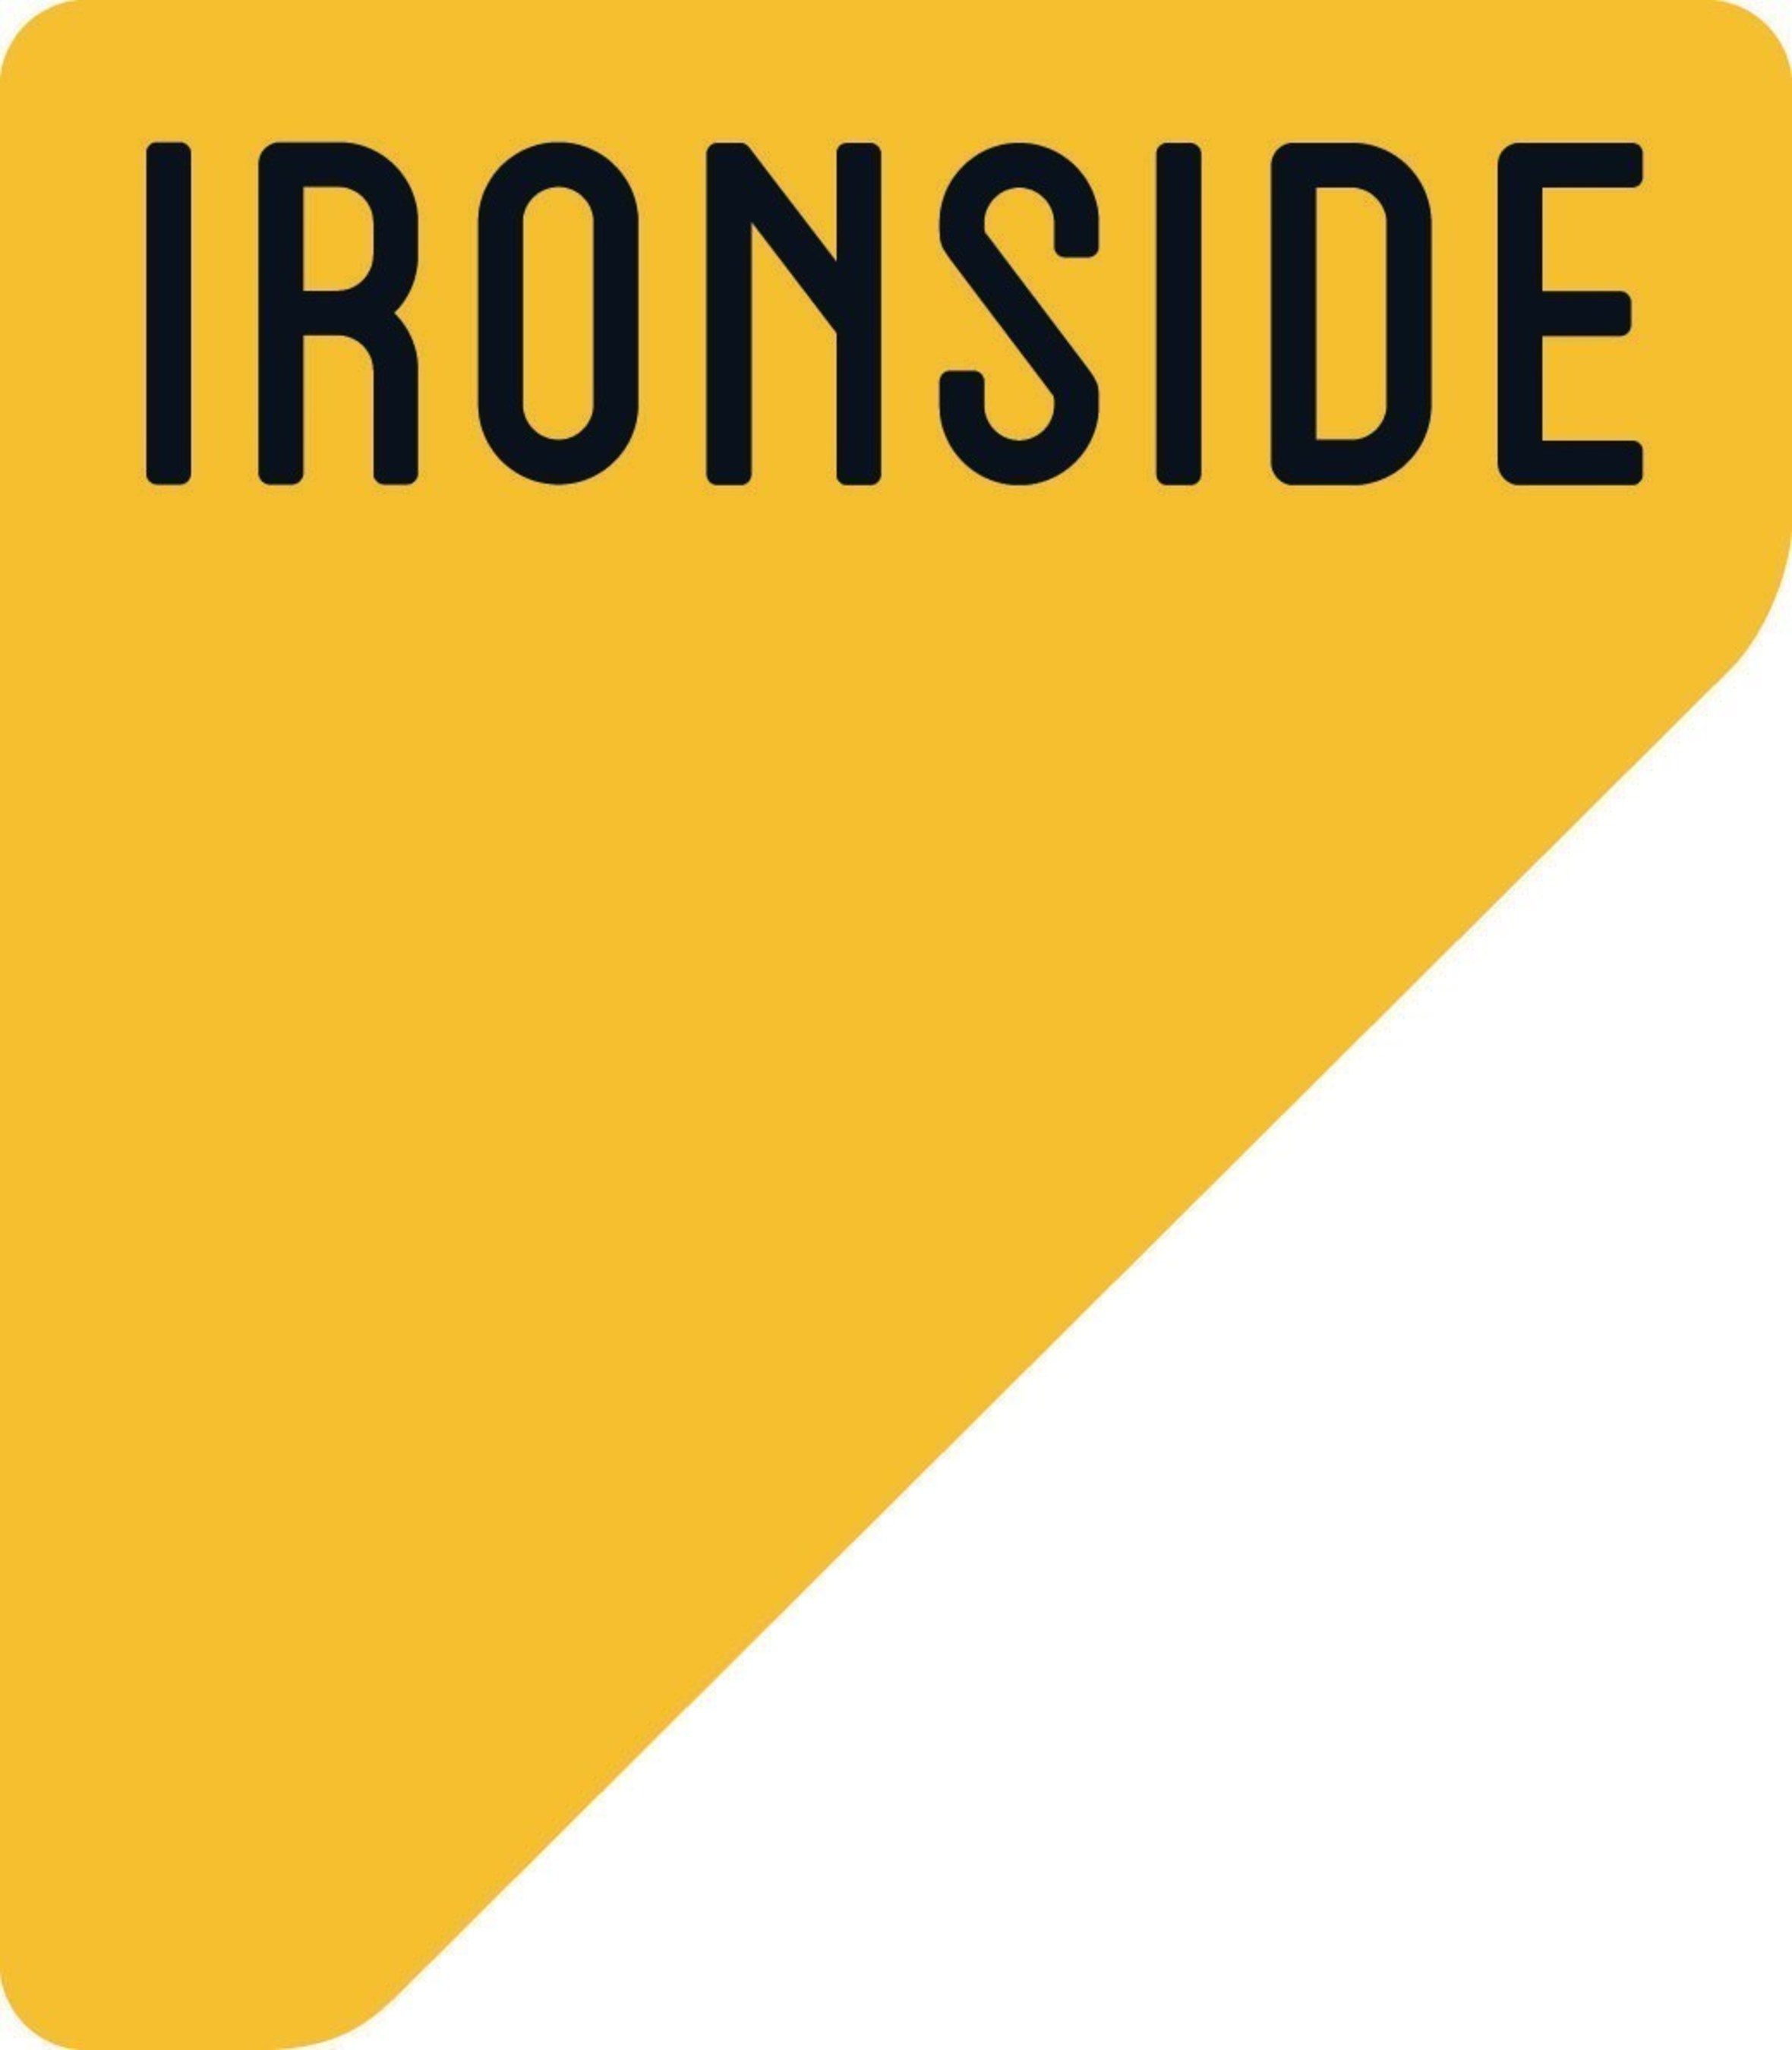 Ironside is an enterprise data & analytics solution provider and system integrator. From strategy to execution, we help organizations translate business goals and challenges to technology solutions that enable business insight, analysis, and data'driven decision making.